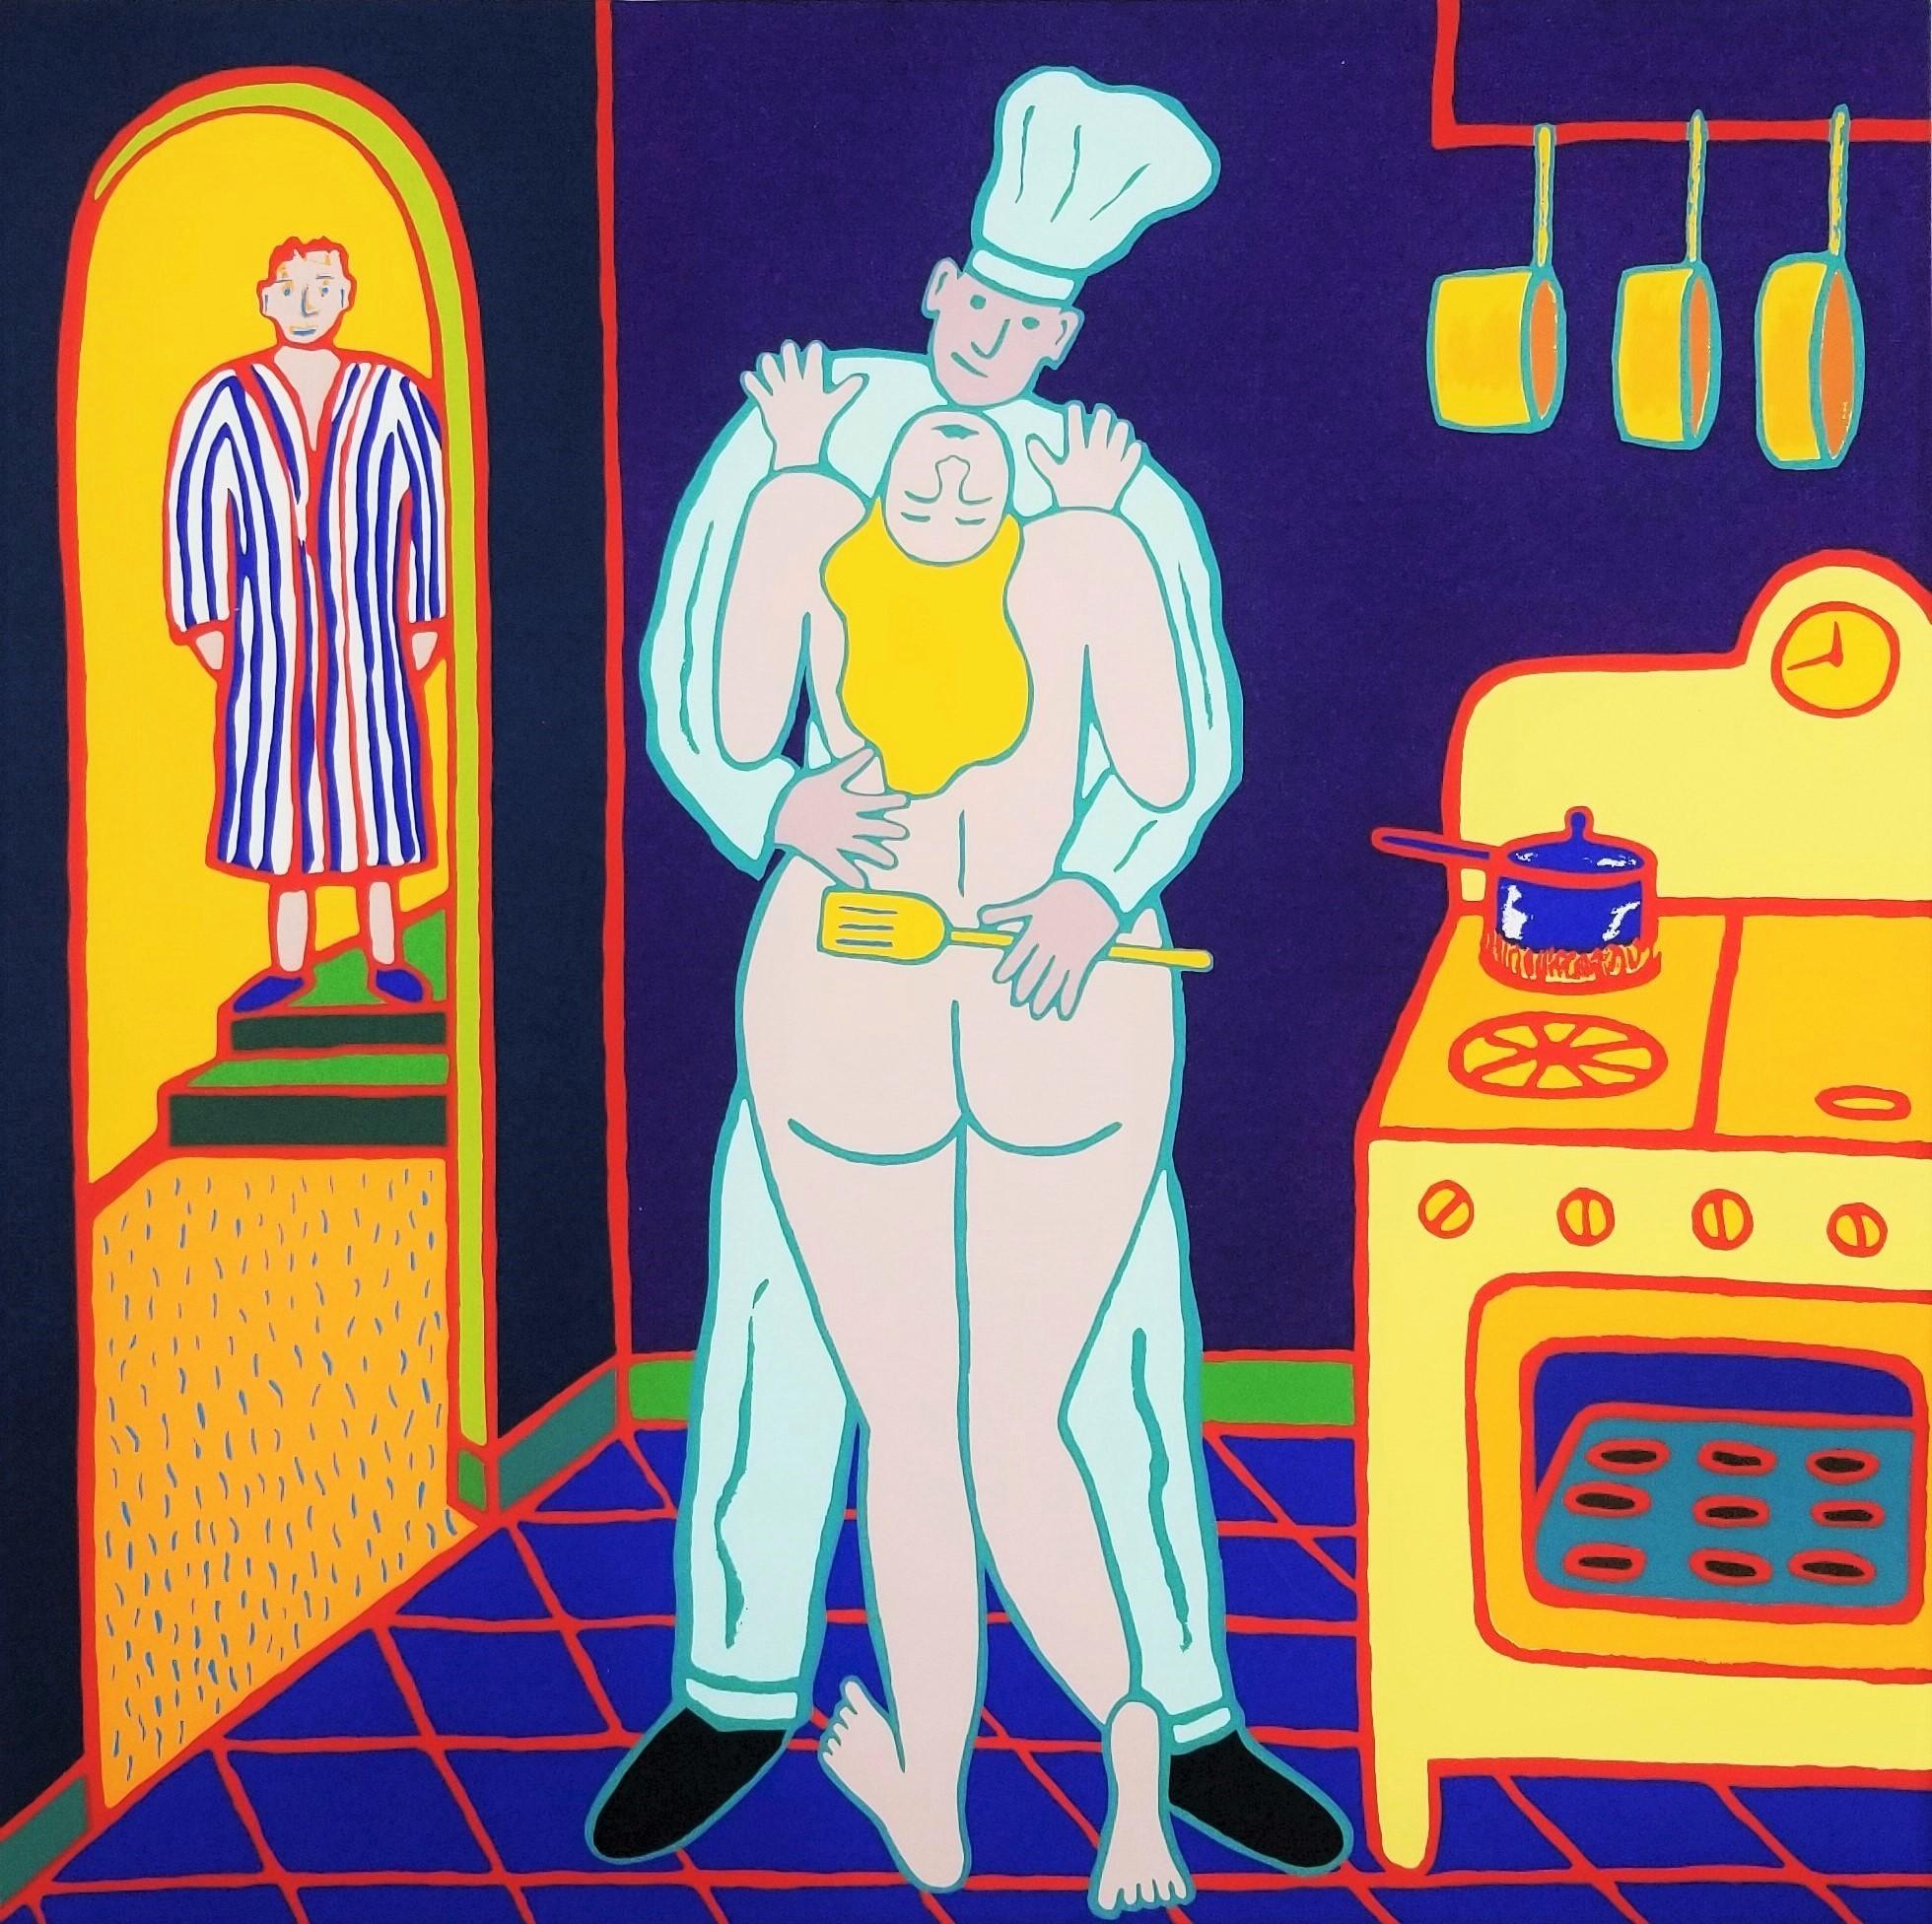 Dan May Nude Print – Are the Cookies Ready Yet /// Contemporary Pop Art Siebdruck Nude Food Chef